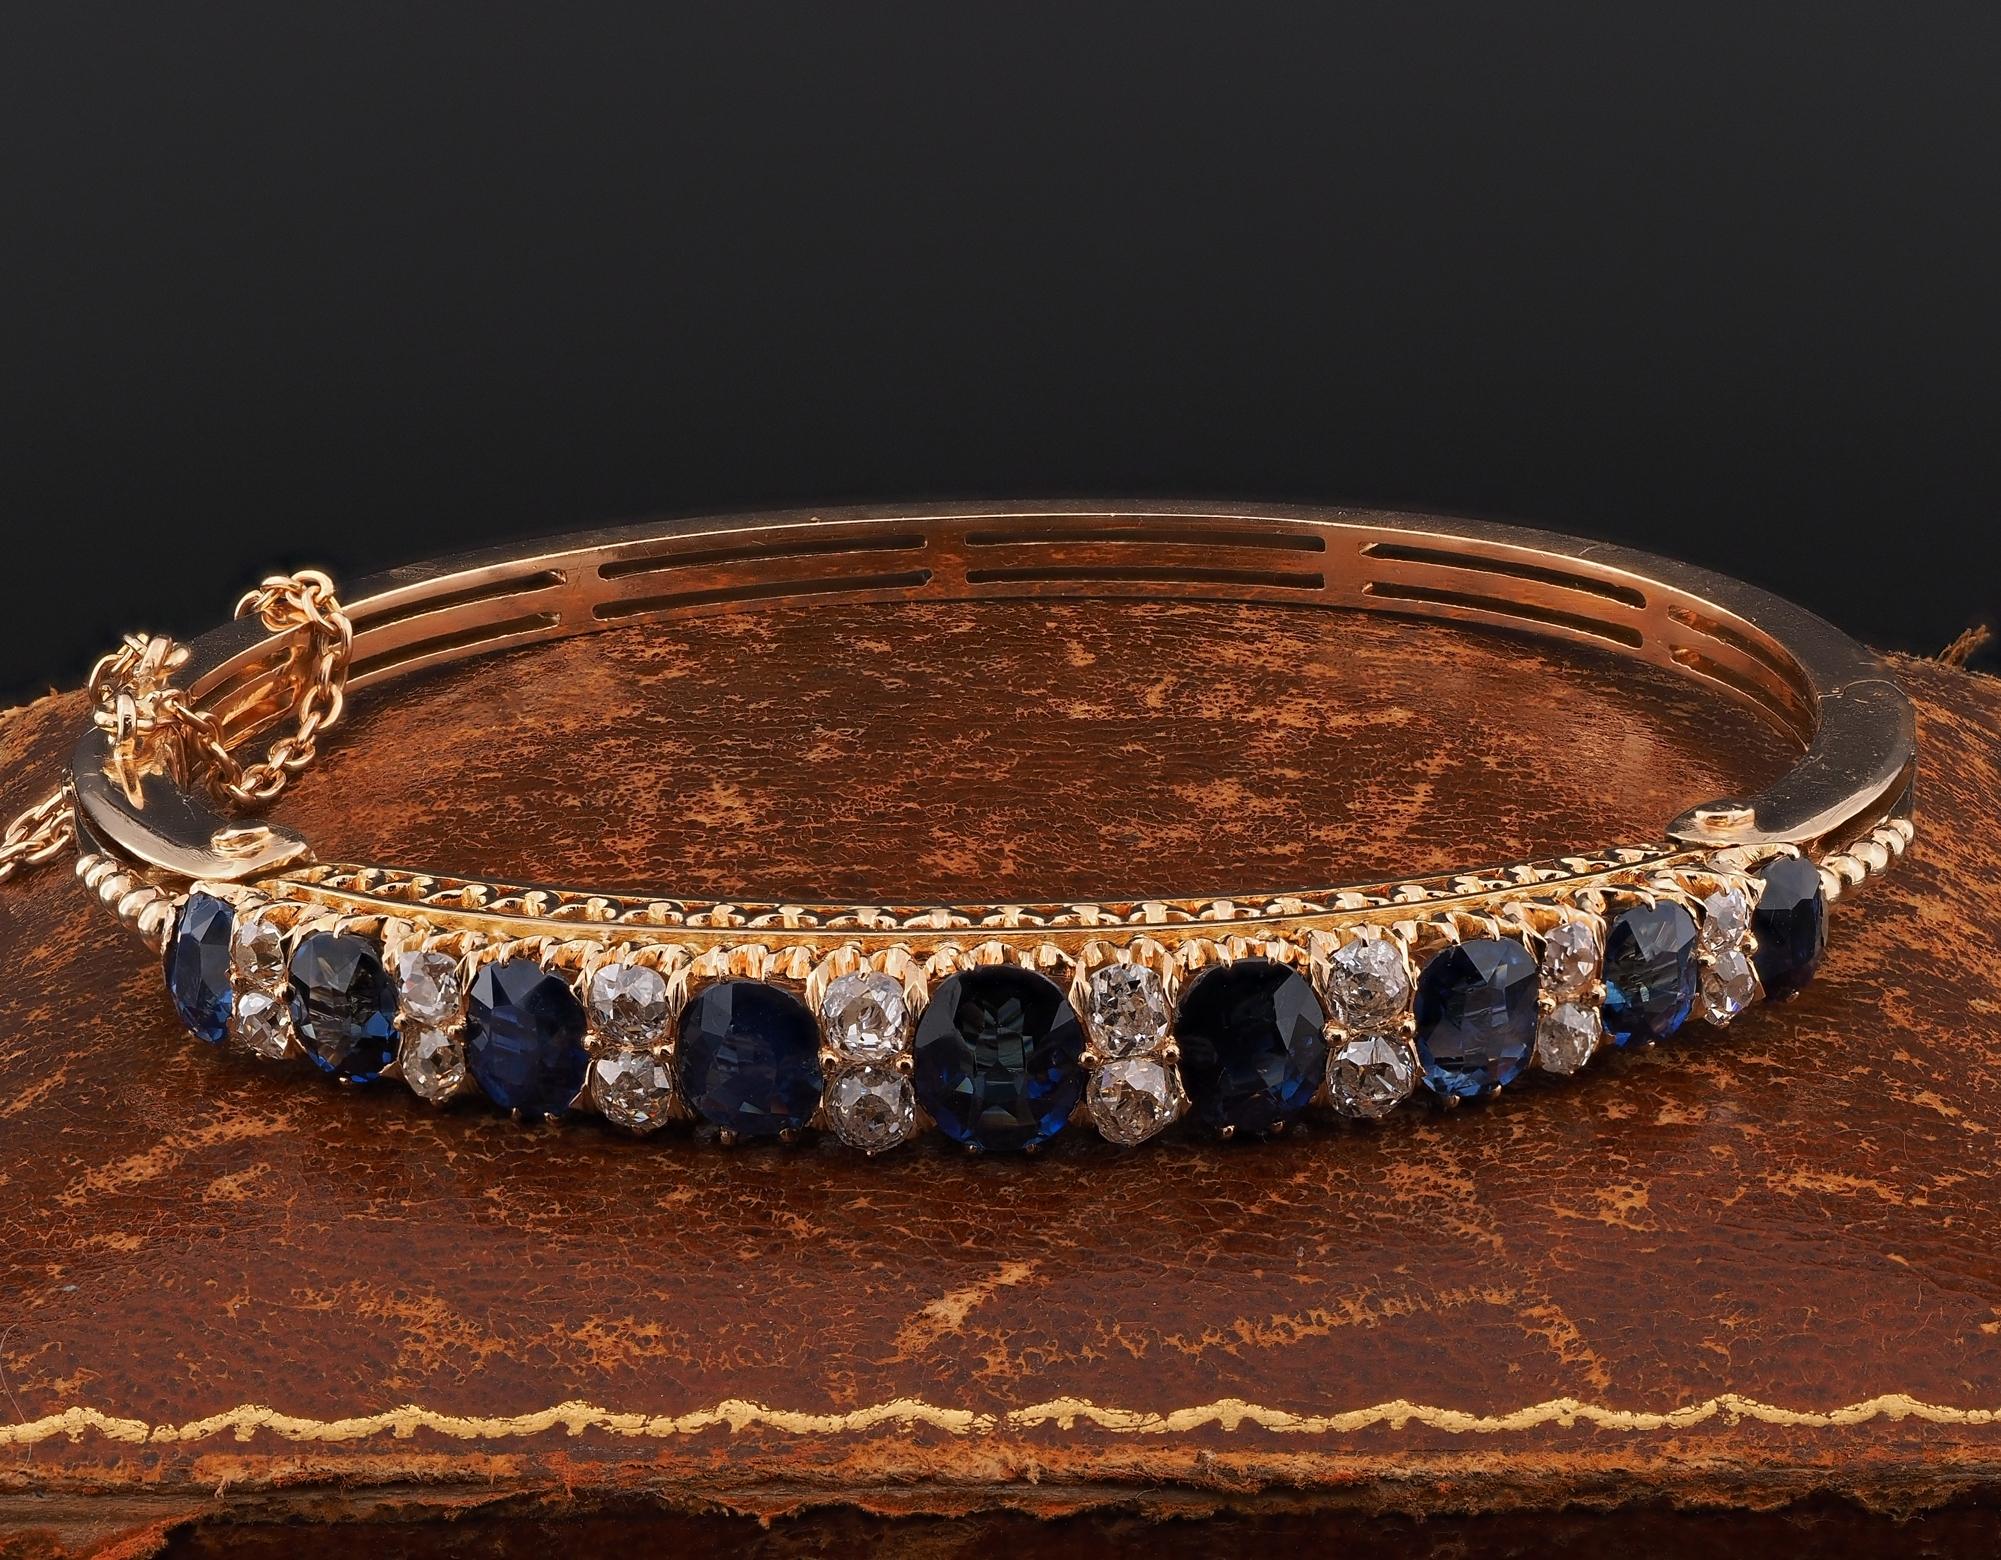 Victorian to Cherish
An outstanding Victorian statement bangle that is in the antique tradition, 1890 ca
Entirely hand crafted of solid 18 KT gold in classy design beautifully detailed with fine fret pierced under-gallery work
It faces up with the